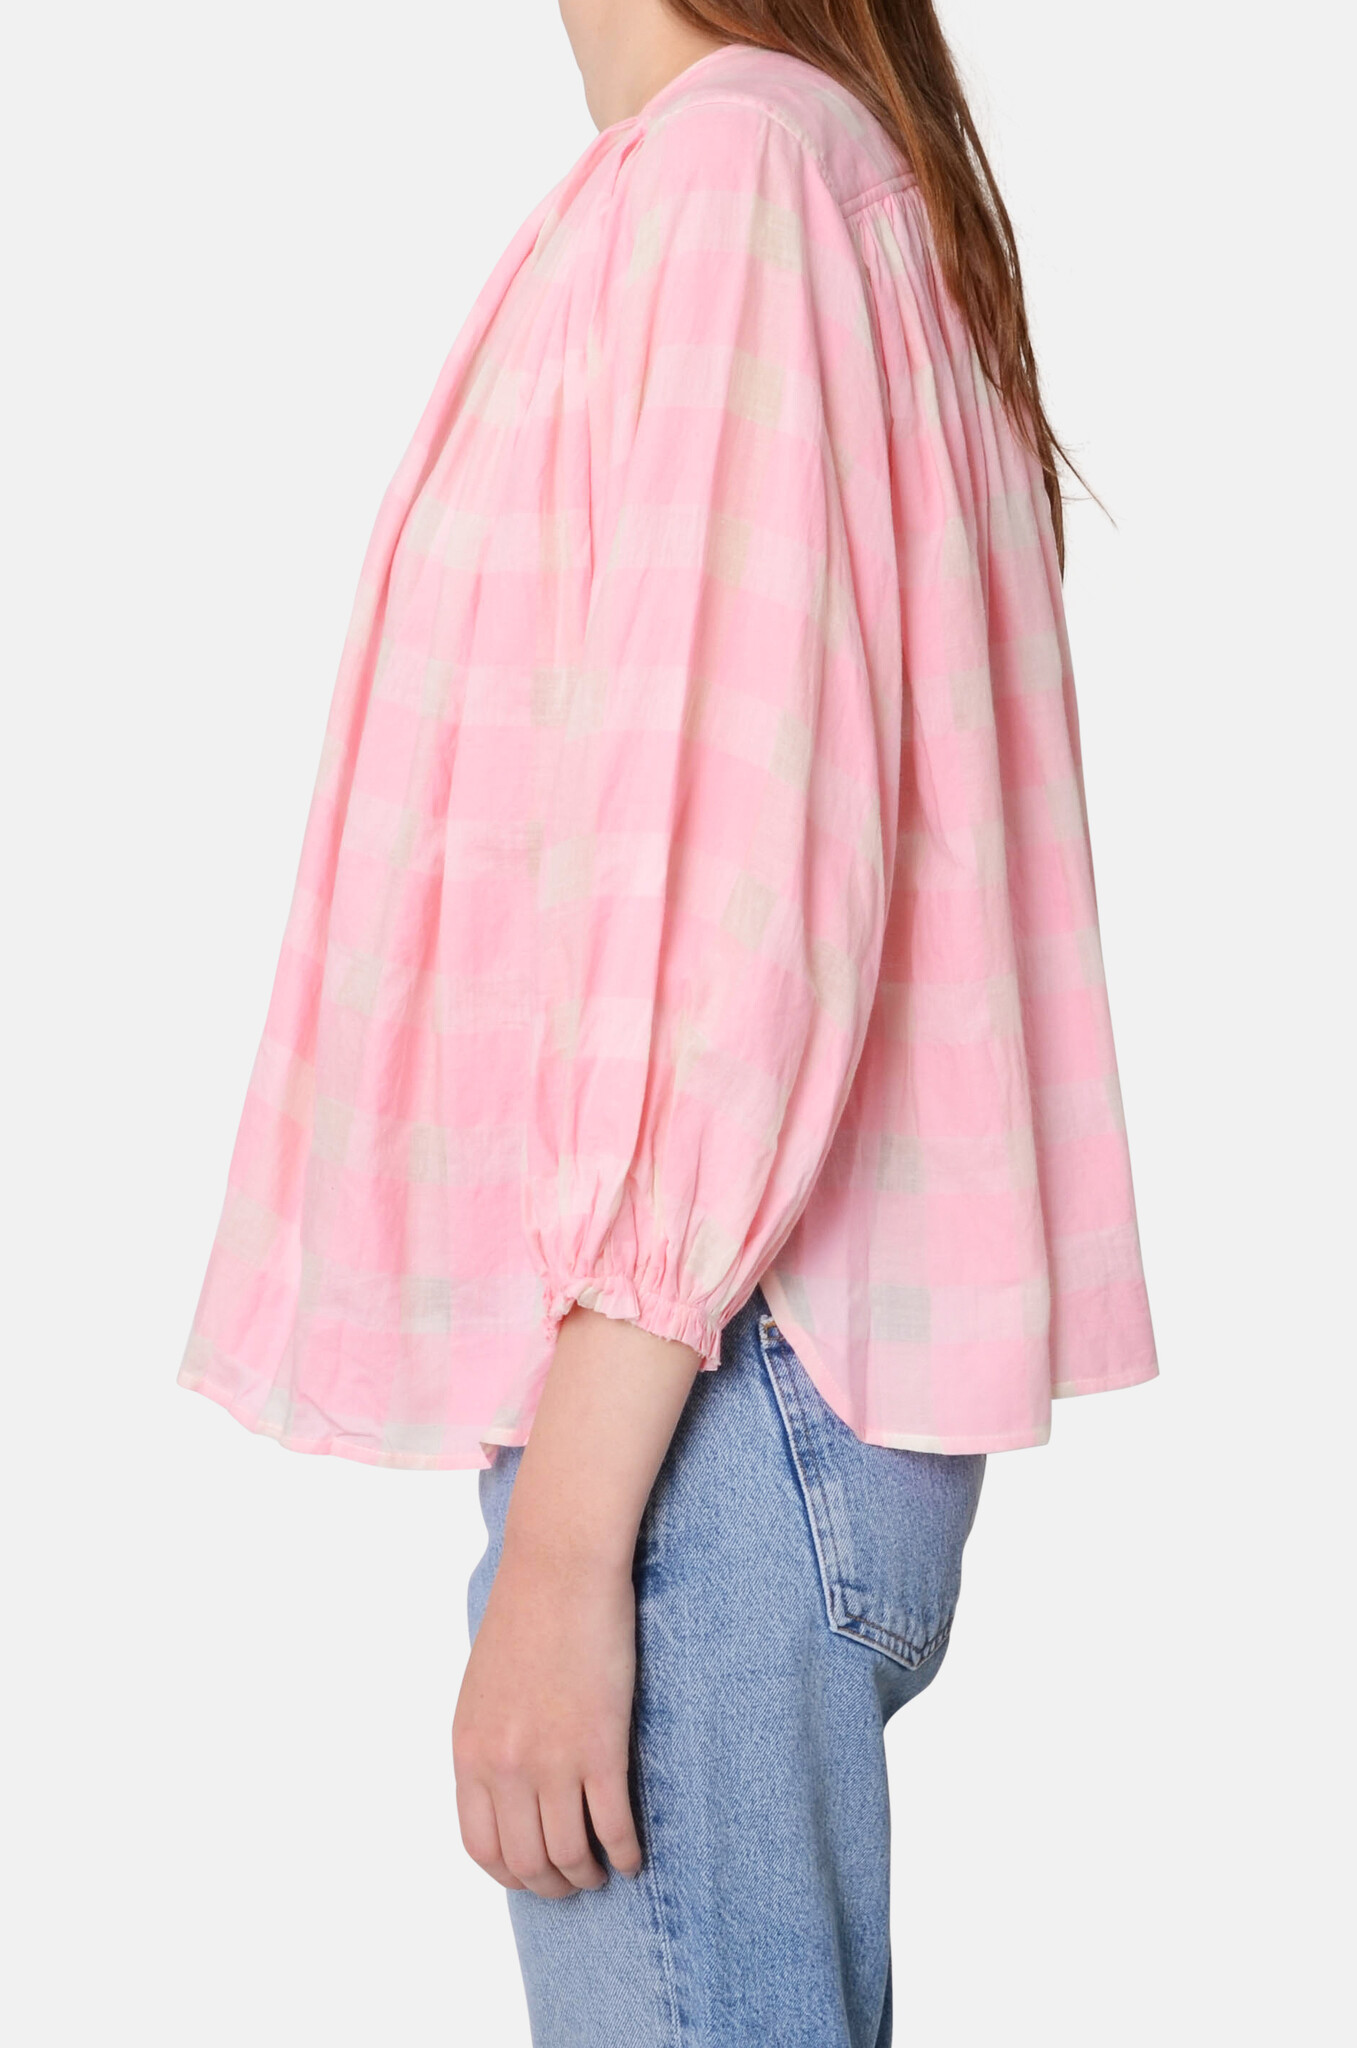 Cigarbox Blouse in Pink Gingham-3